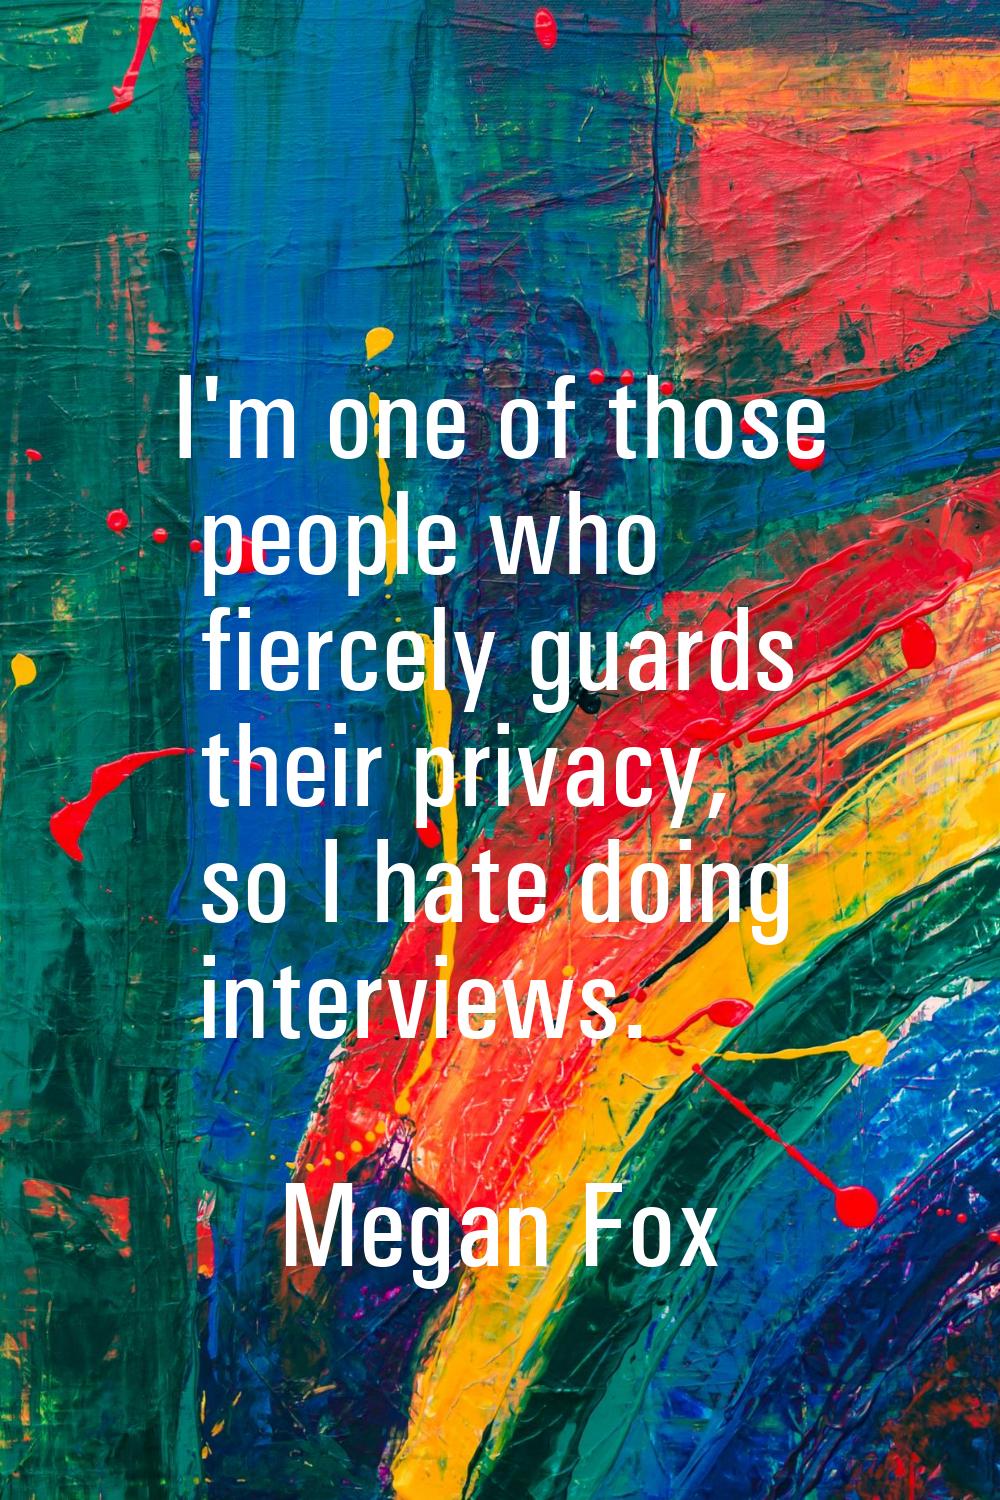 I'm one of those people who fiercely guards their privacy, so I hate doing interviews.